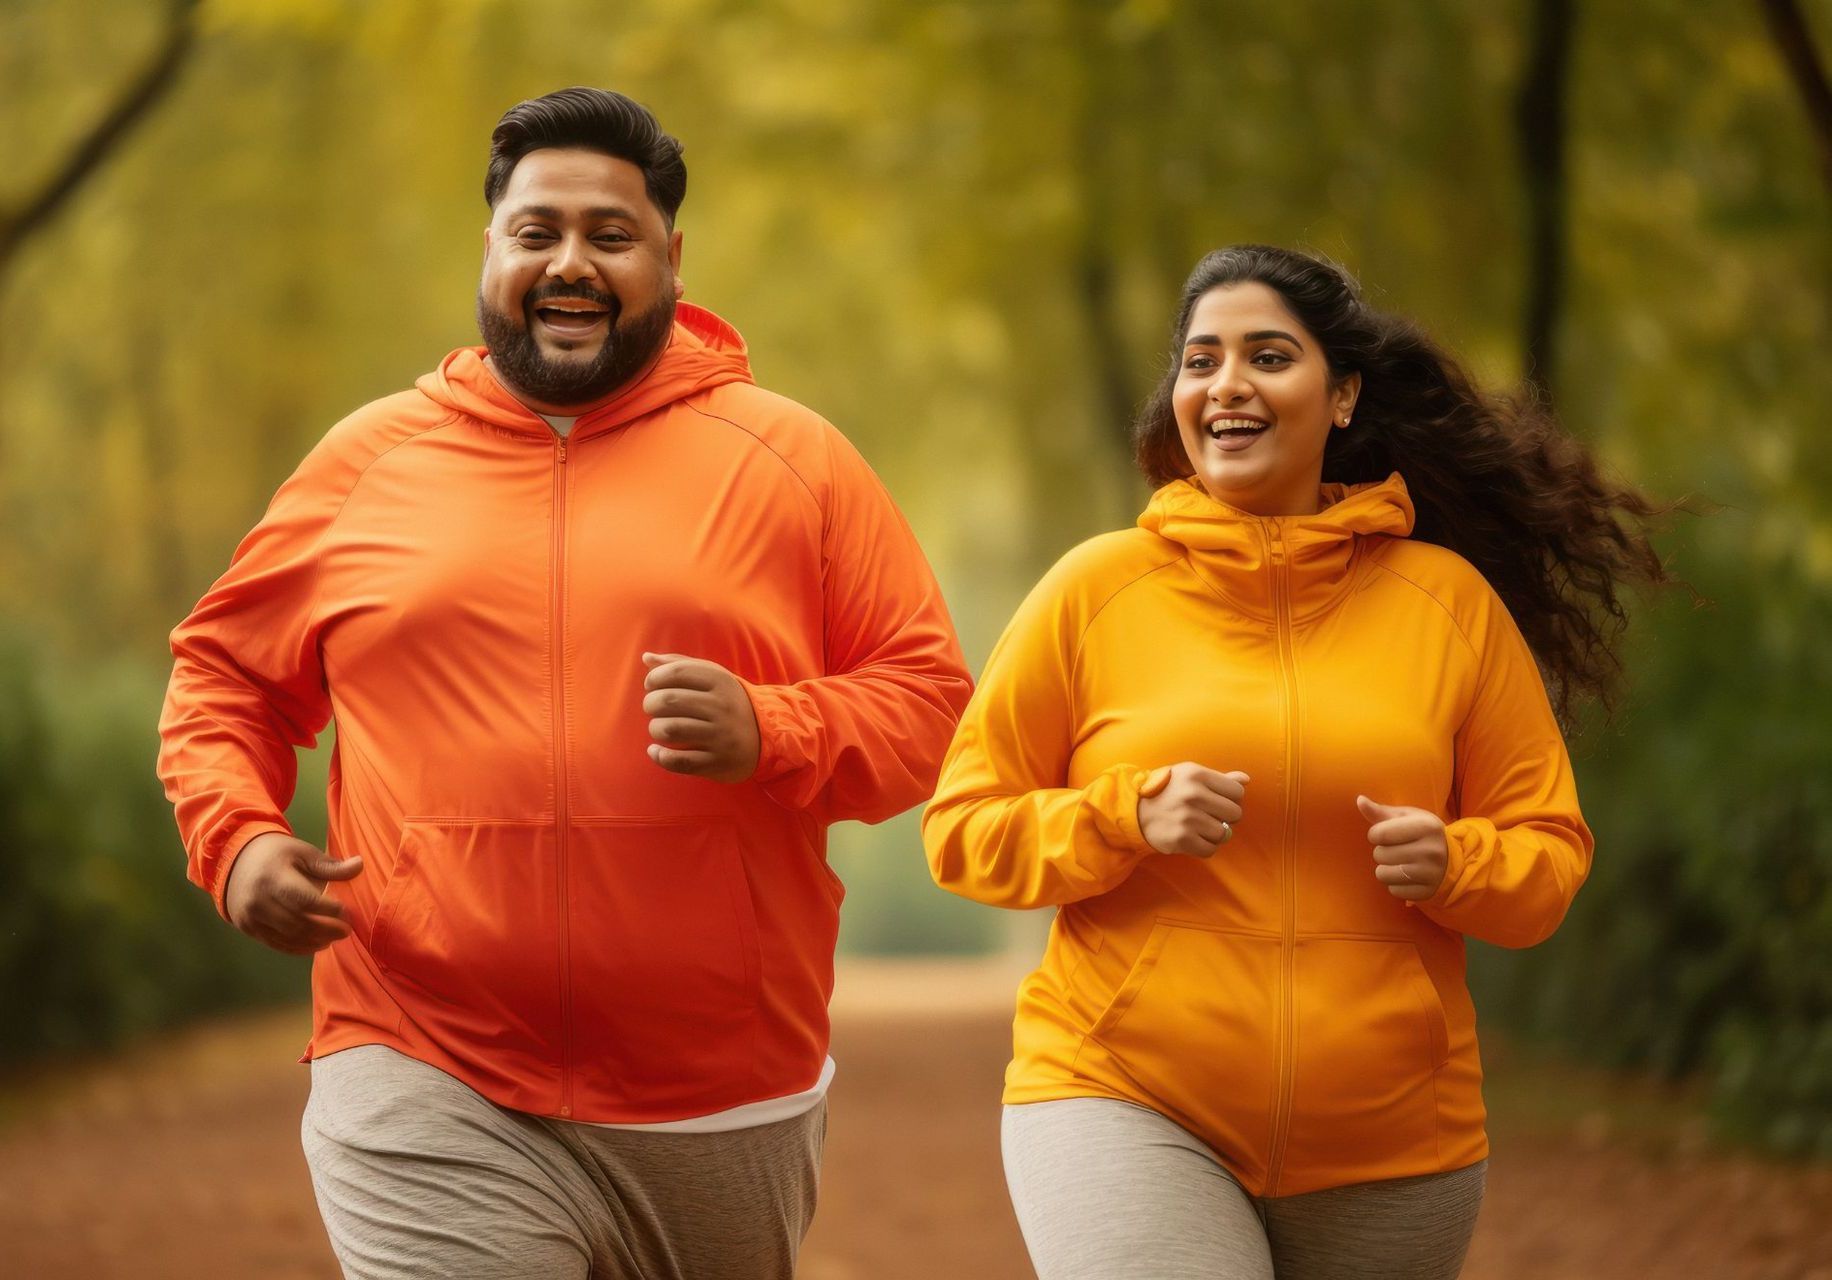 A man and a woman are jogging outdoors